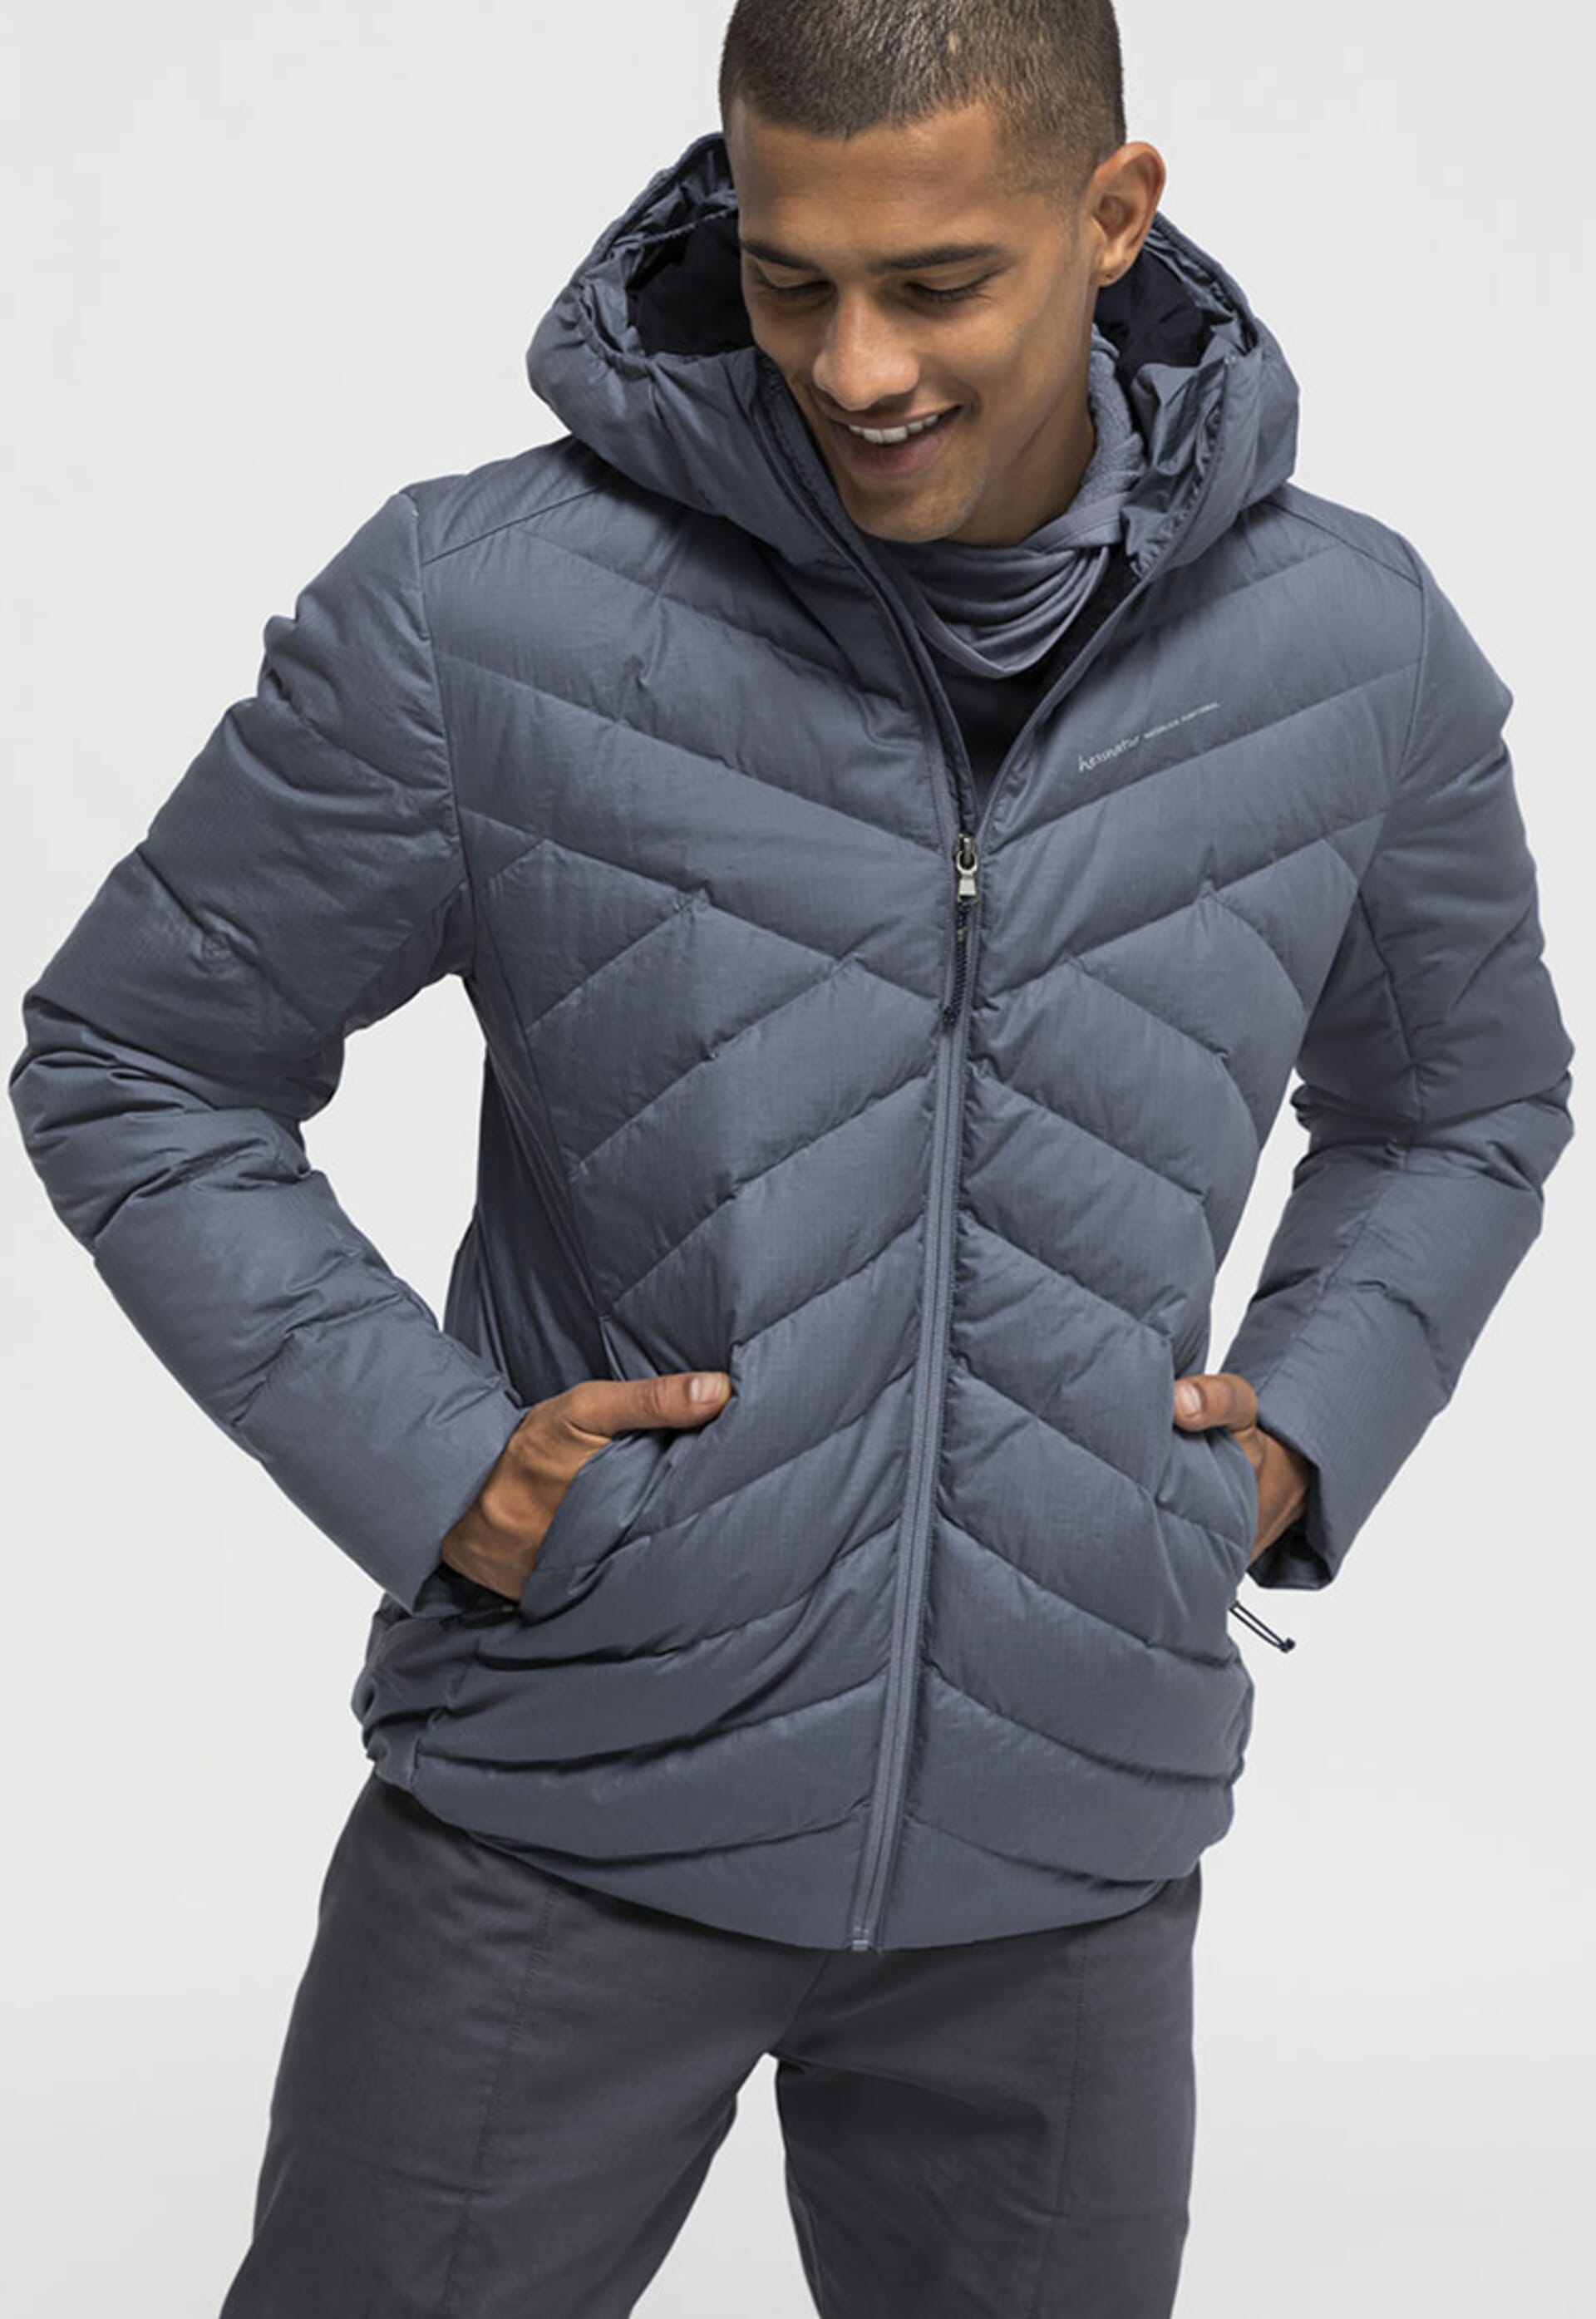 Outdoor quilted jacket for men.